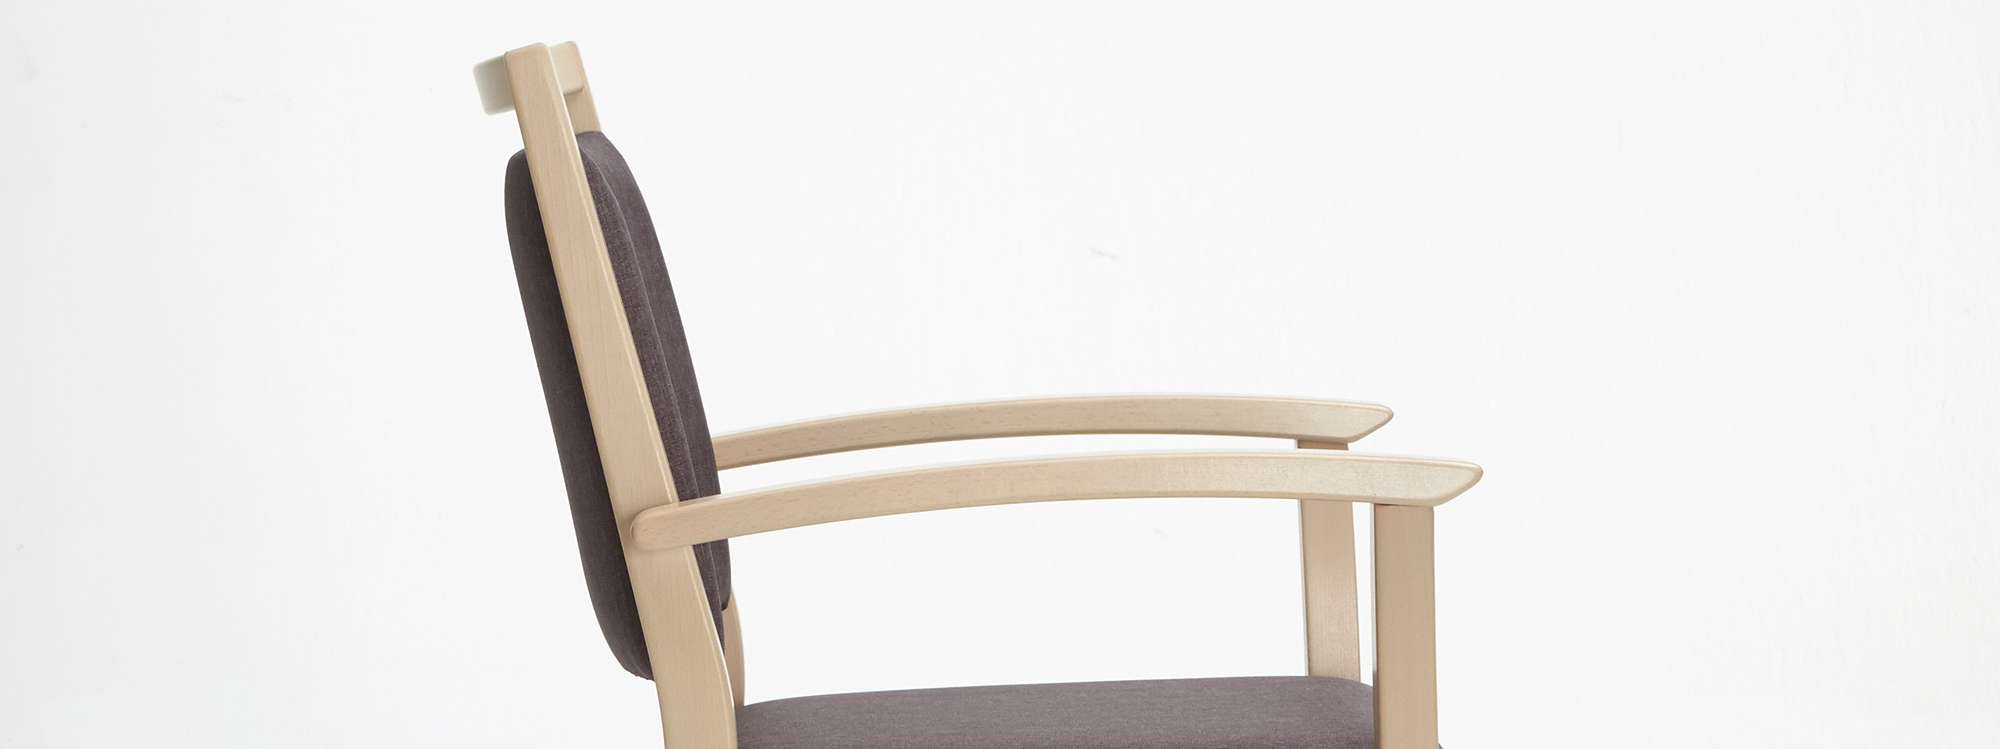 The Mavo model as a stackable chair with armrests